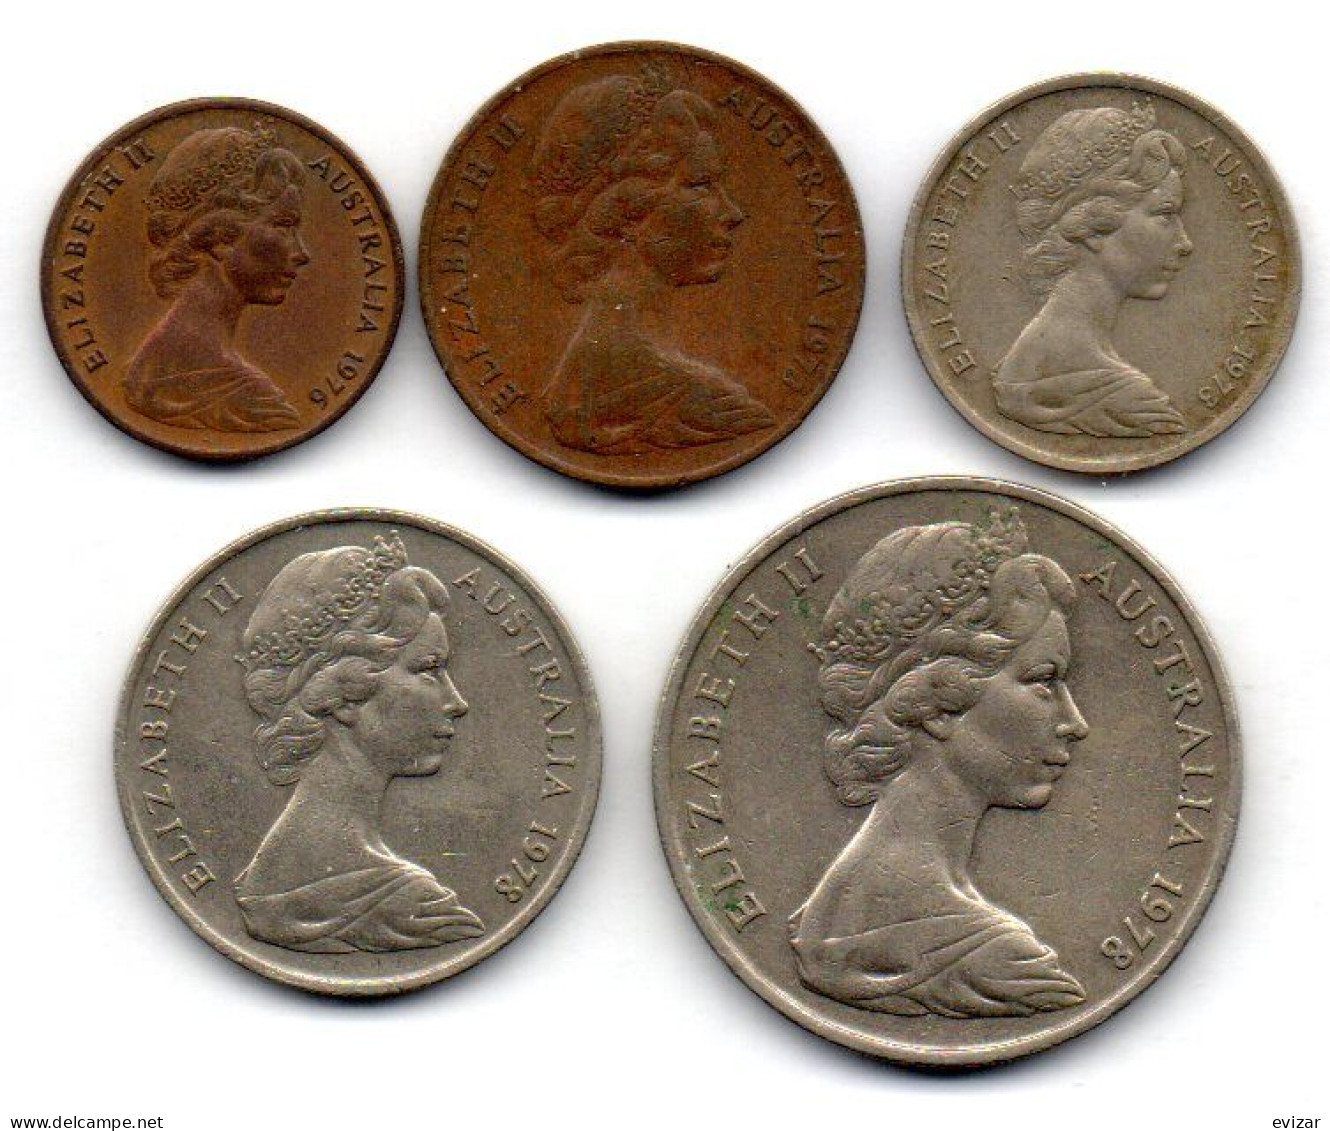 AUSTRALIA, Set Of Five Coins 1, 2, 5, 10, 20 Cents, Bronze, Copper-Nickel, Year 1973-78, KM # 62, 63, 64, 65, 66 - Unclassified